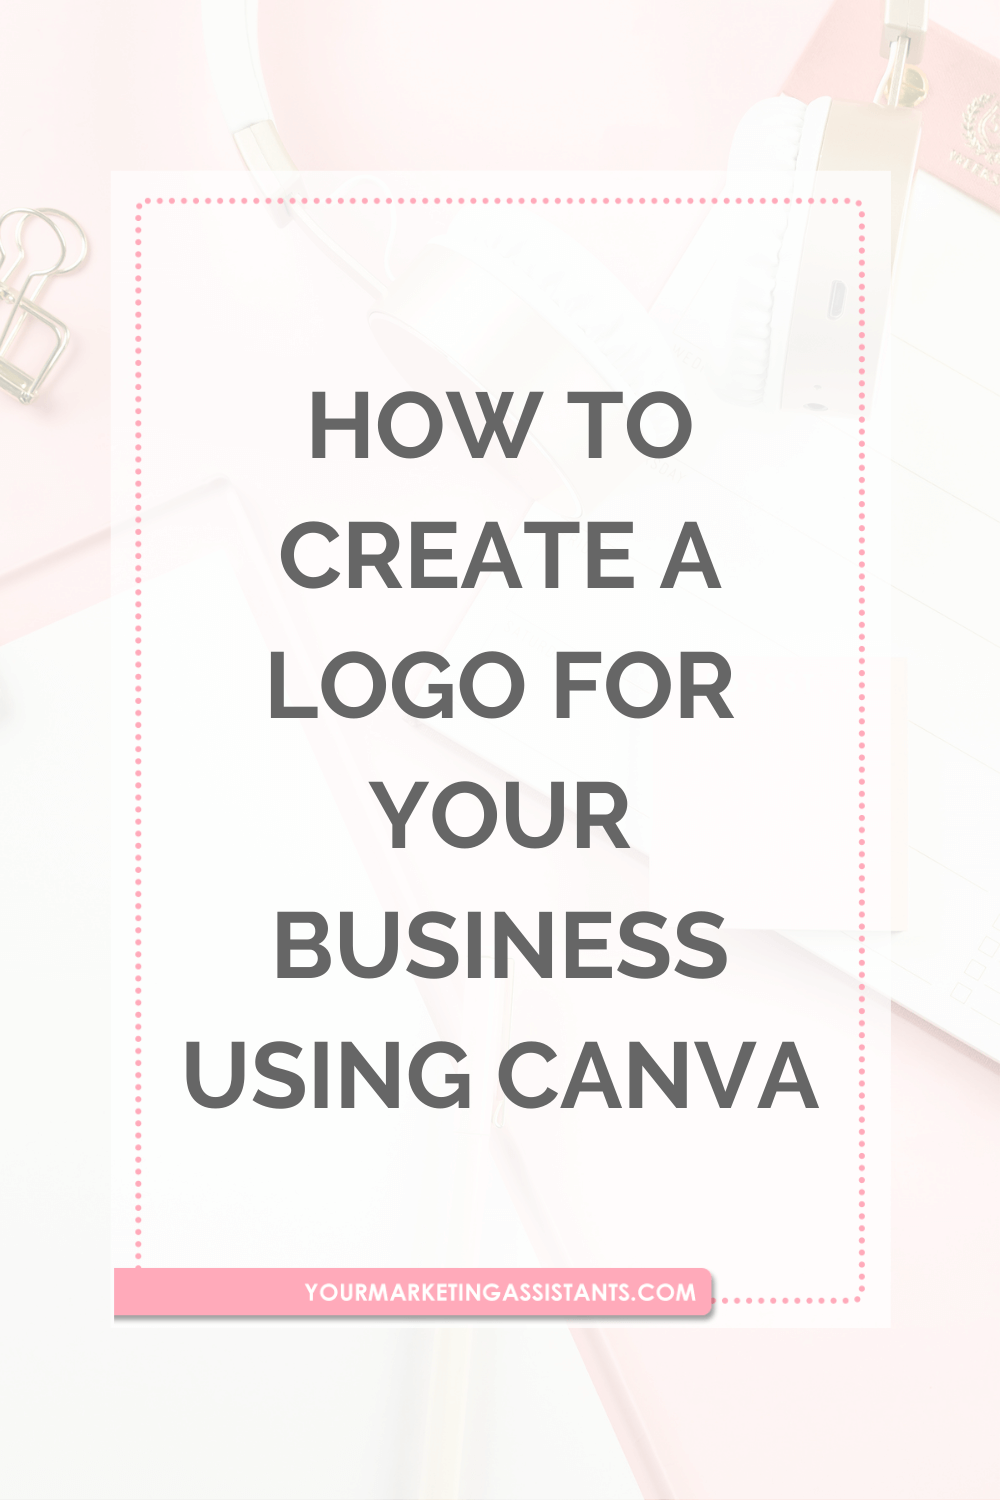 How to create a logo using Canva